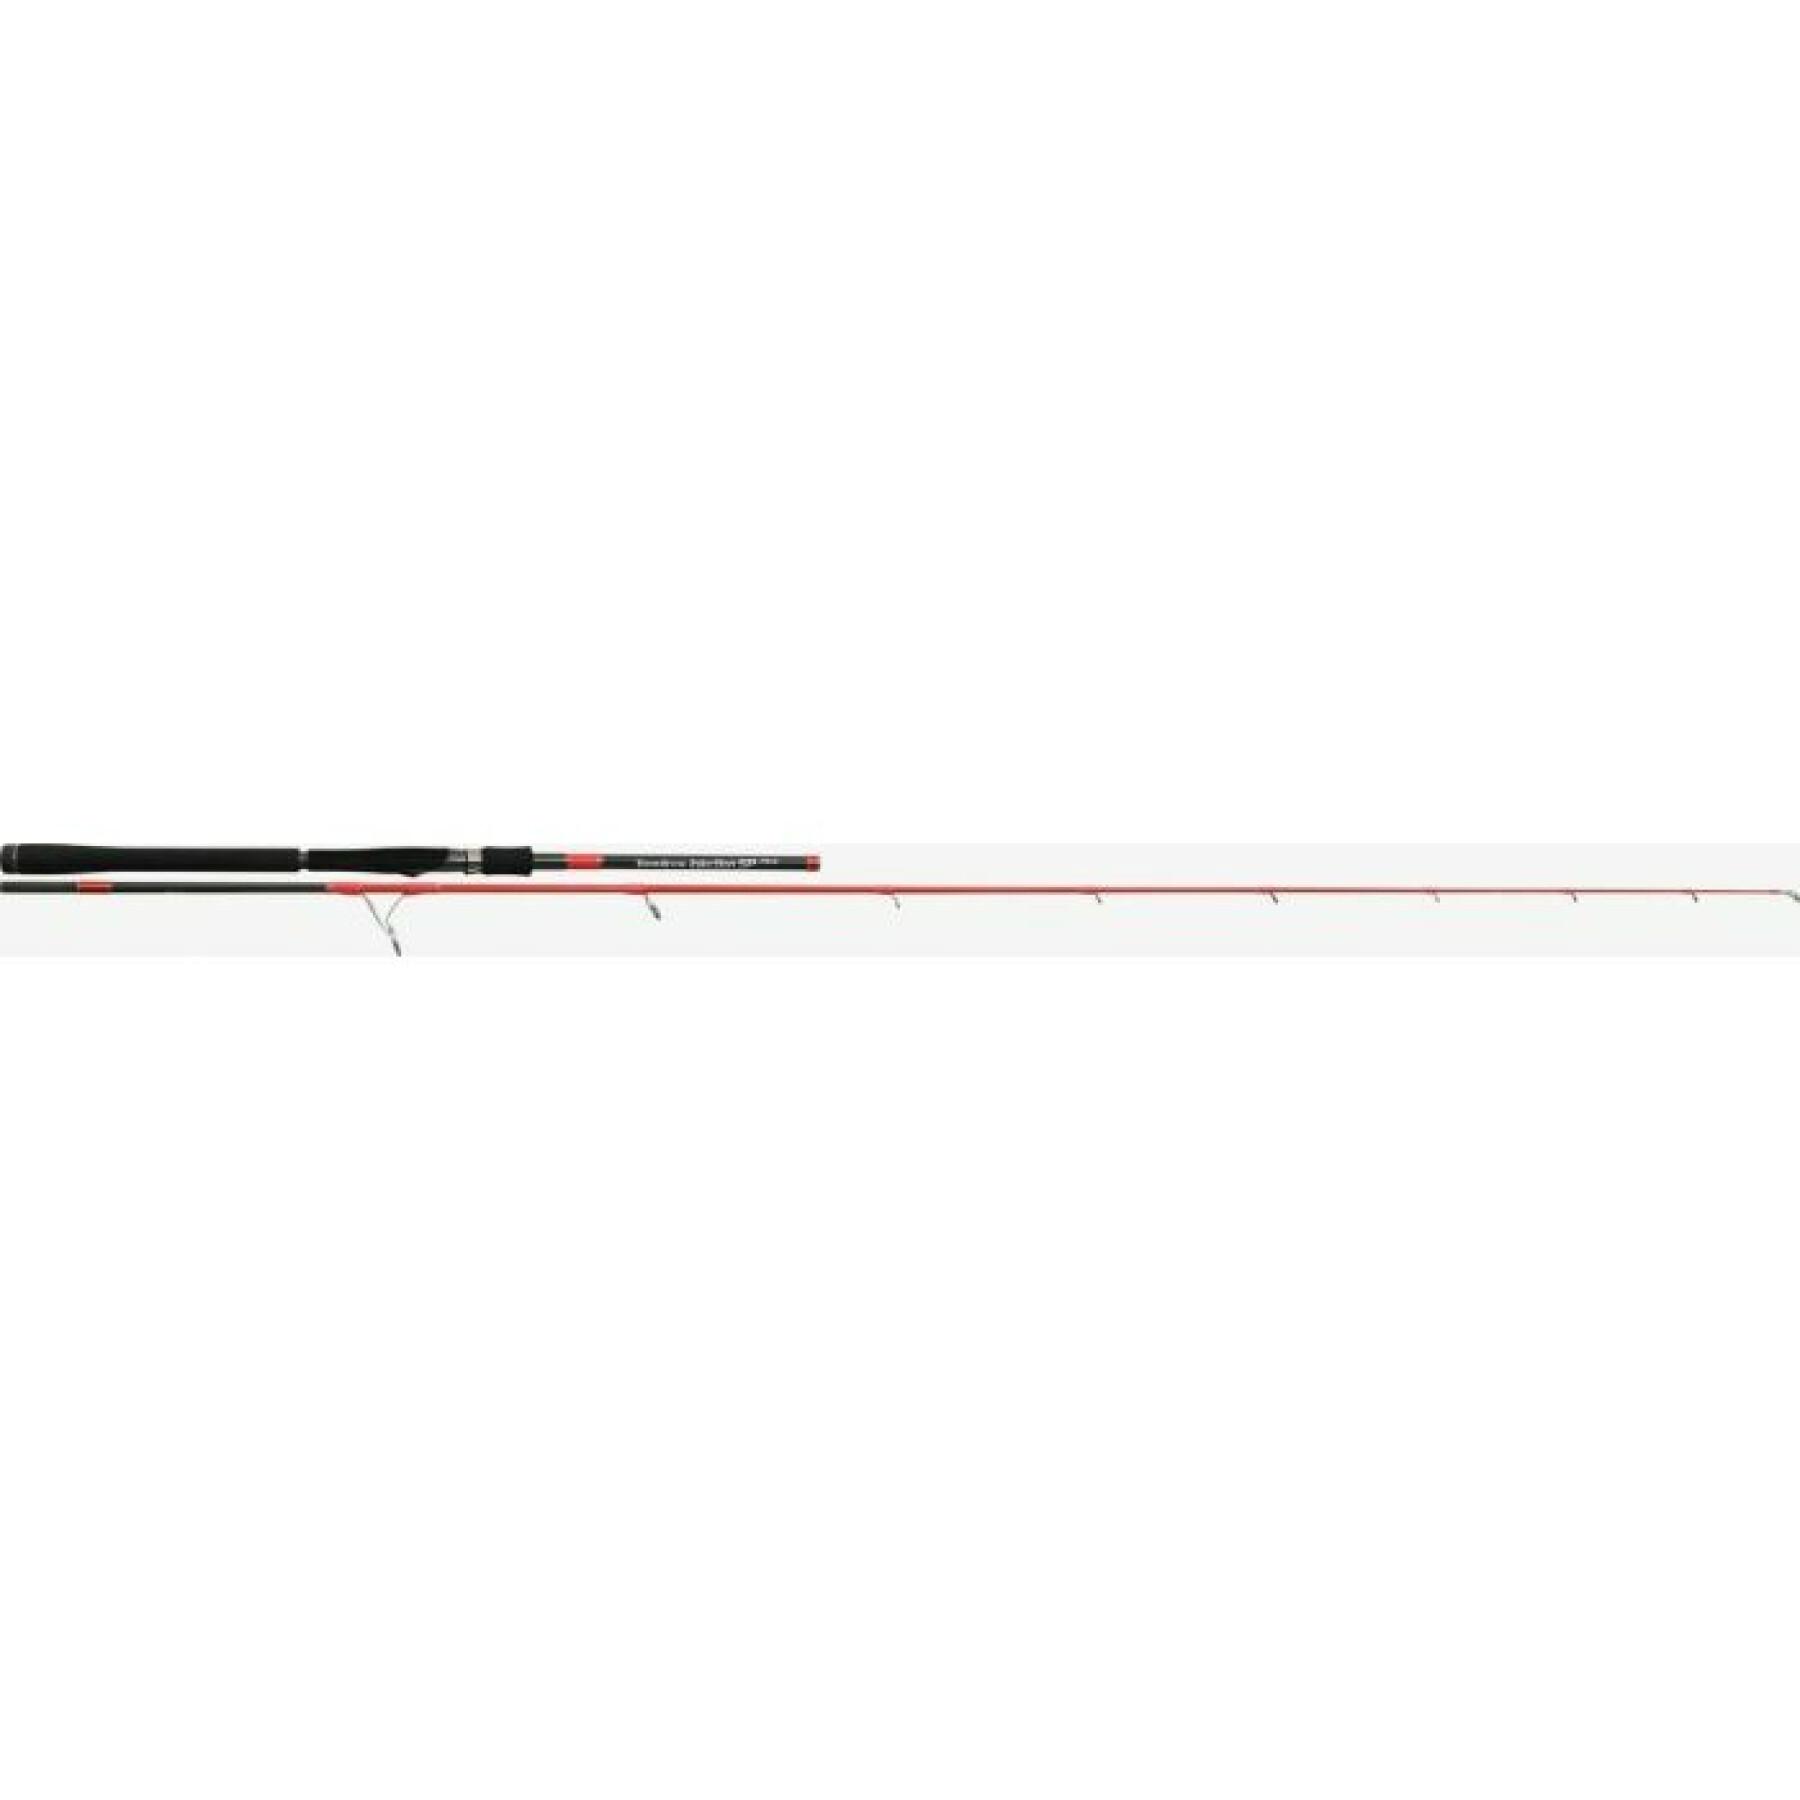 Spinning-Rute Tenryu Injection SP 79H 30-80g